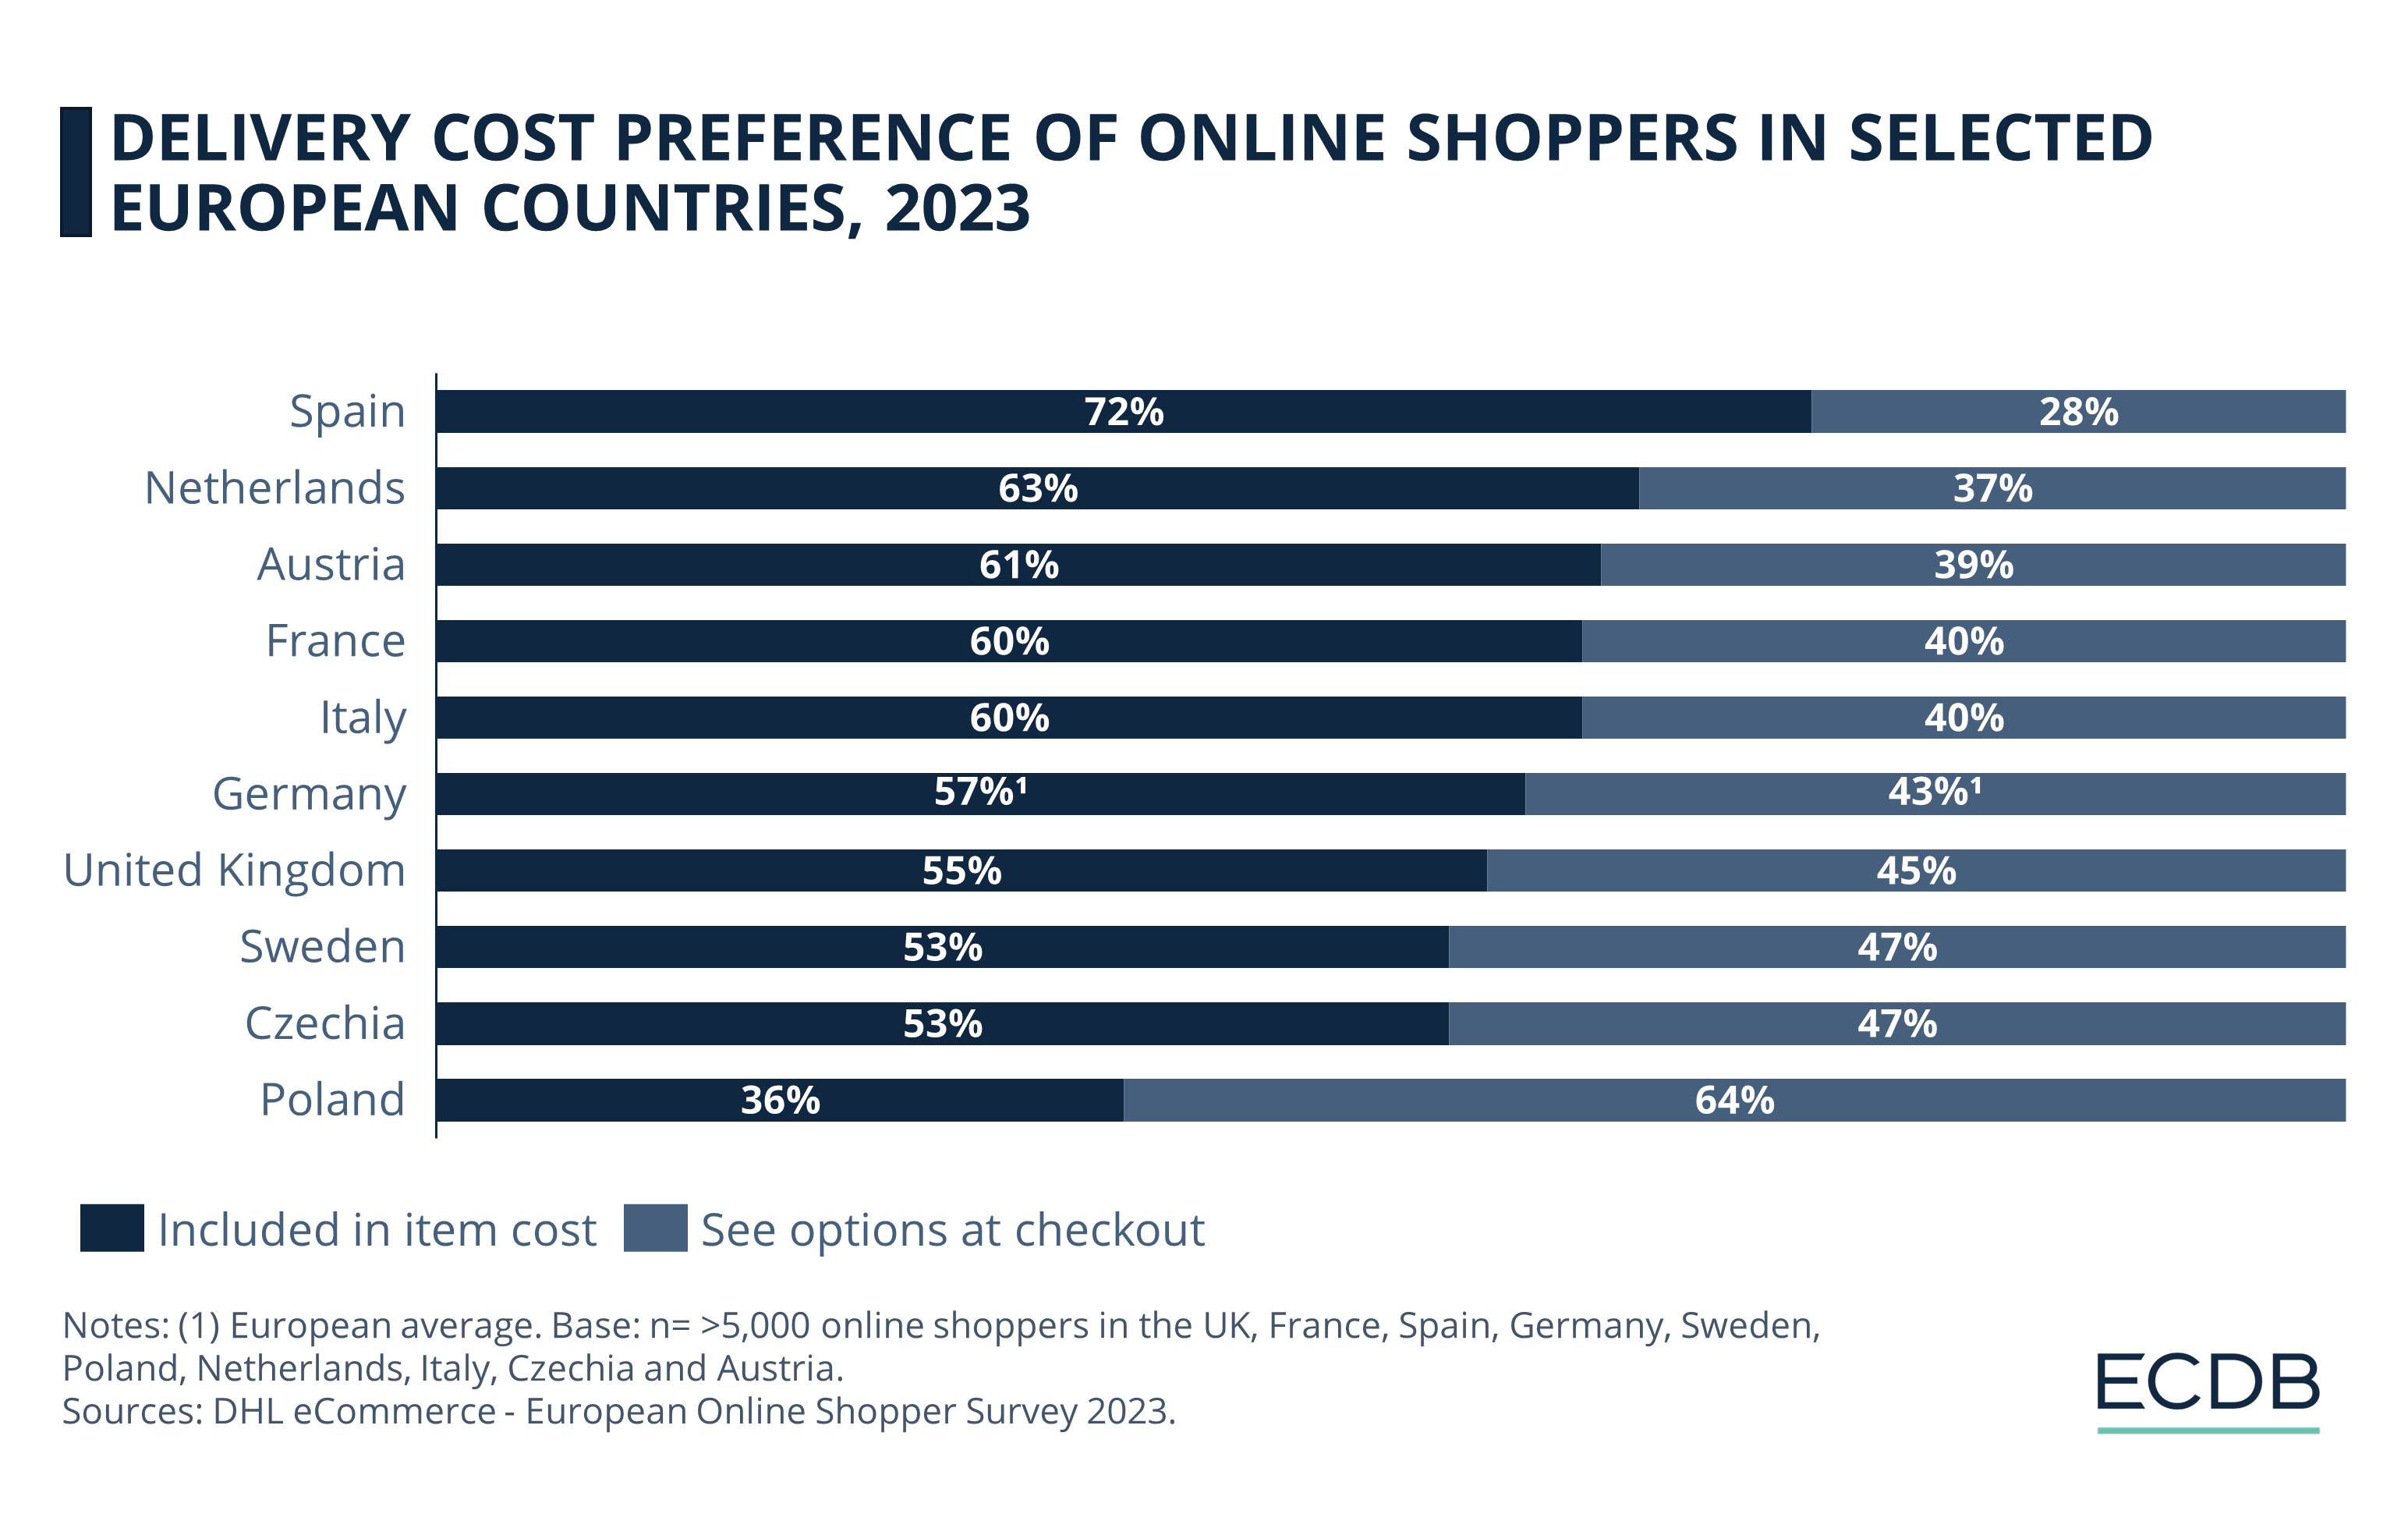 Delivery Cost Preference of Online Shoppers in Selected European Countries, 2023